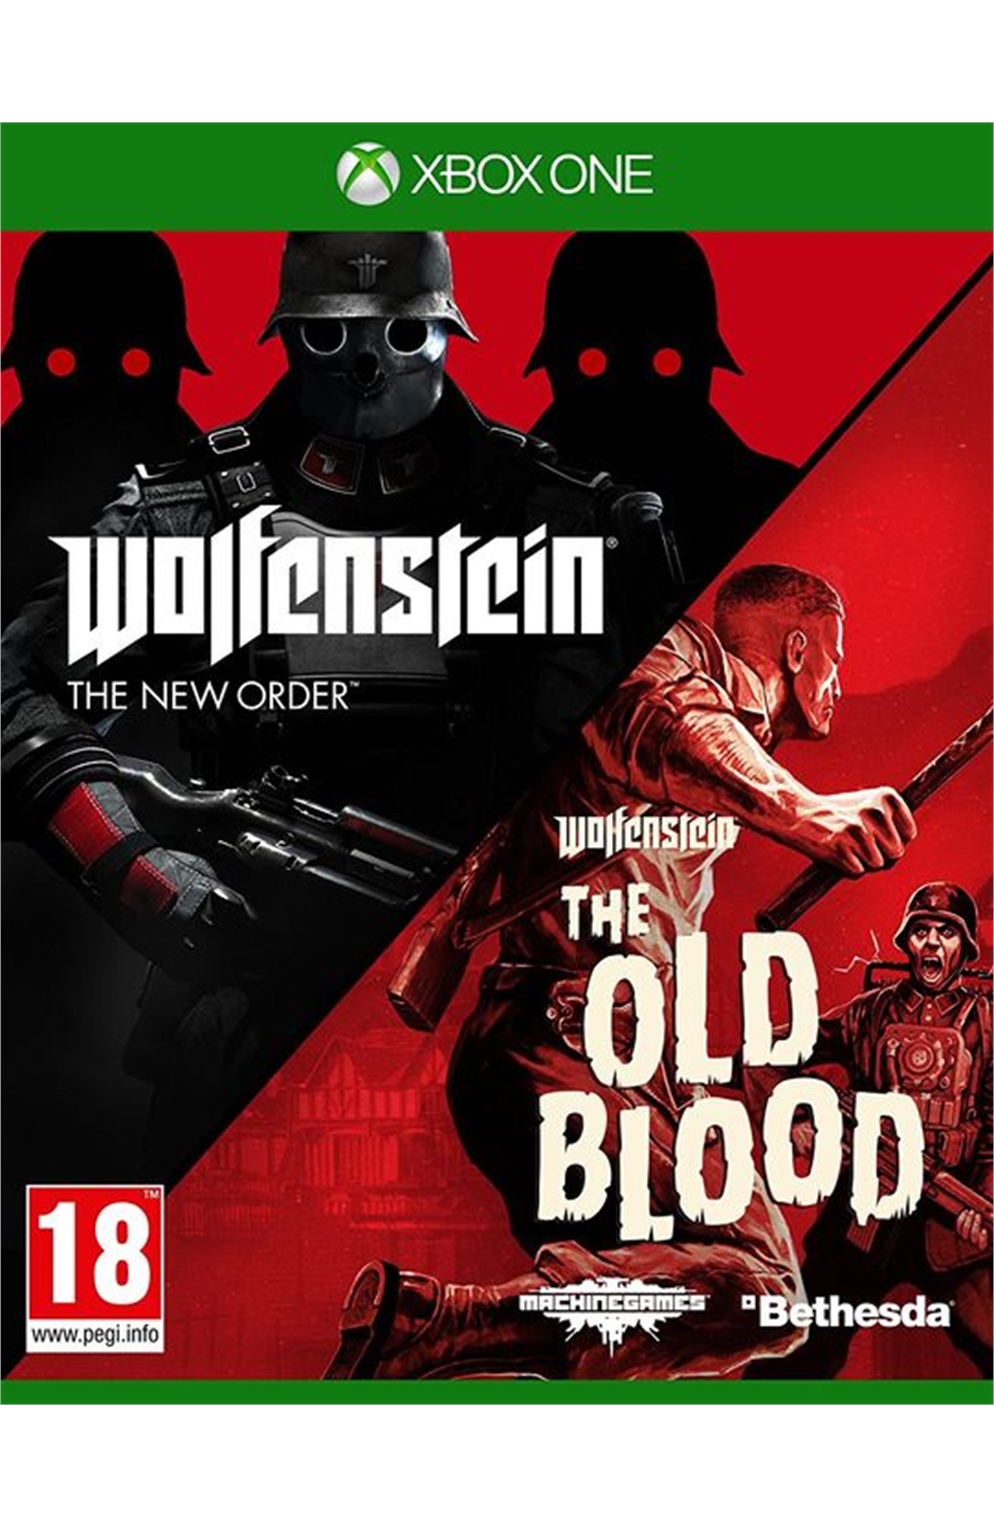 Xbox One Xb1 Wolfenstein The New Order And The Old Blood